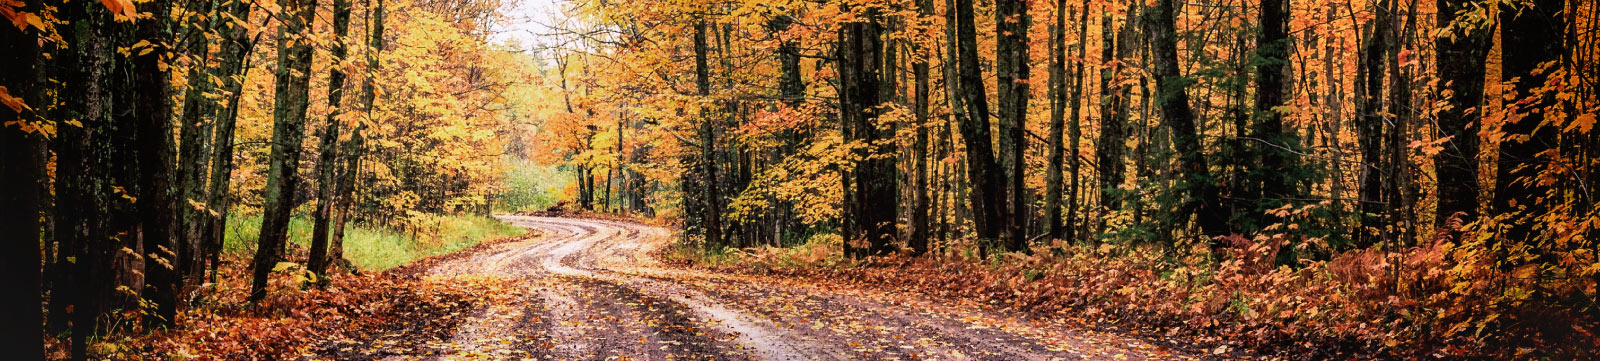 A Michigan road on a fall day